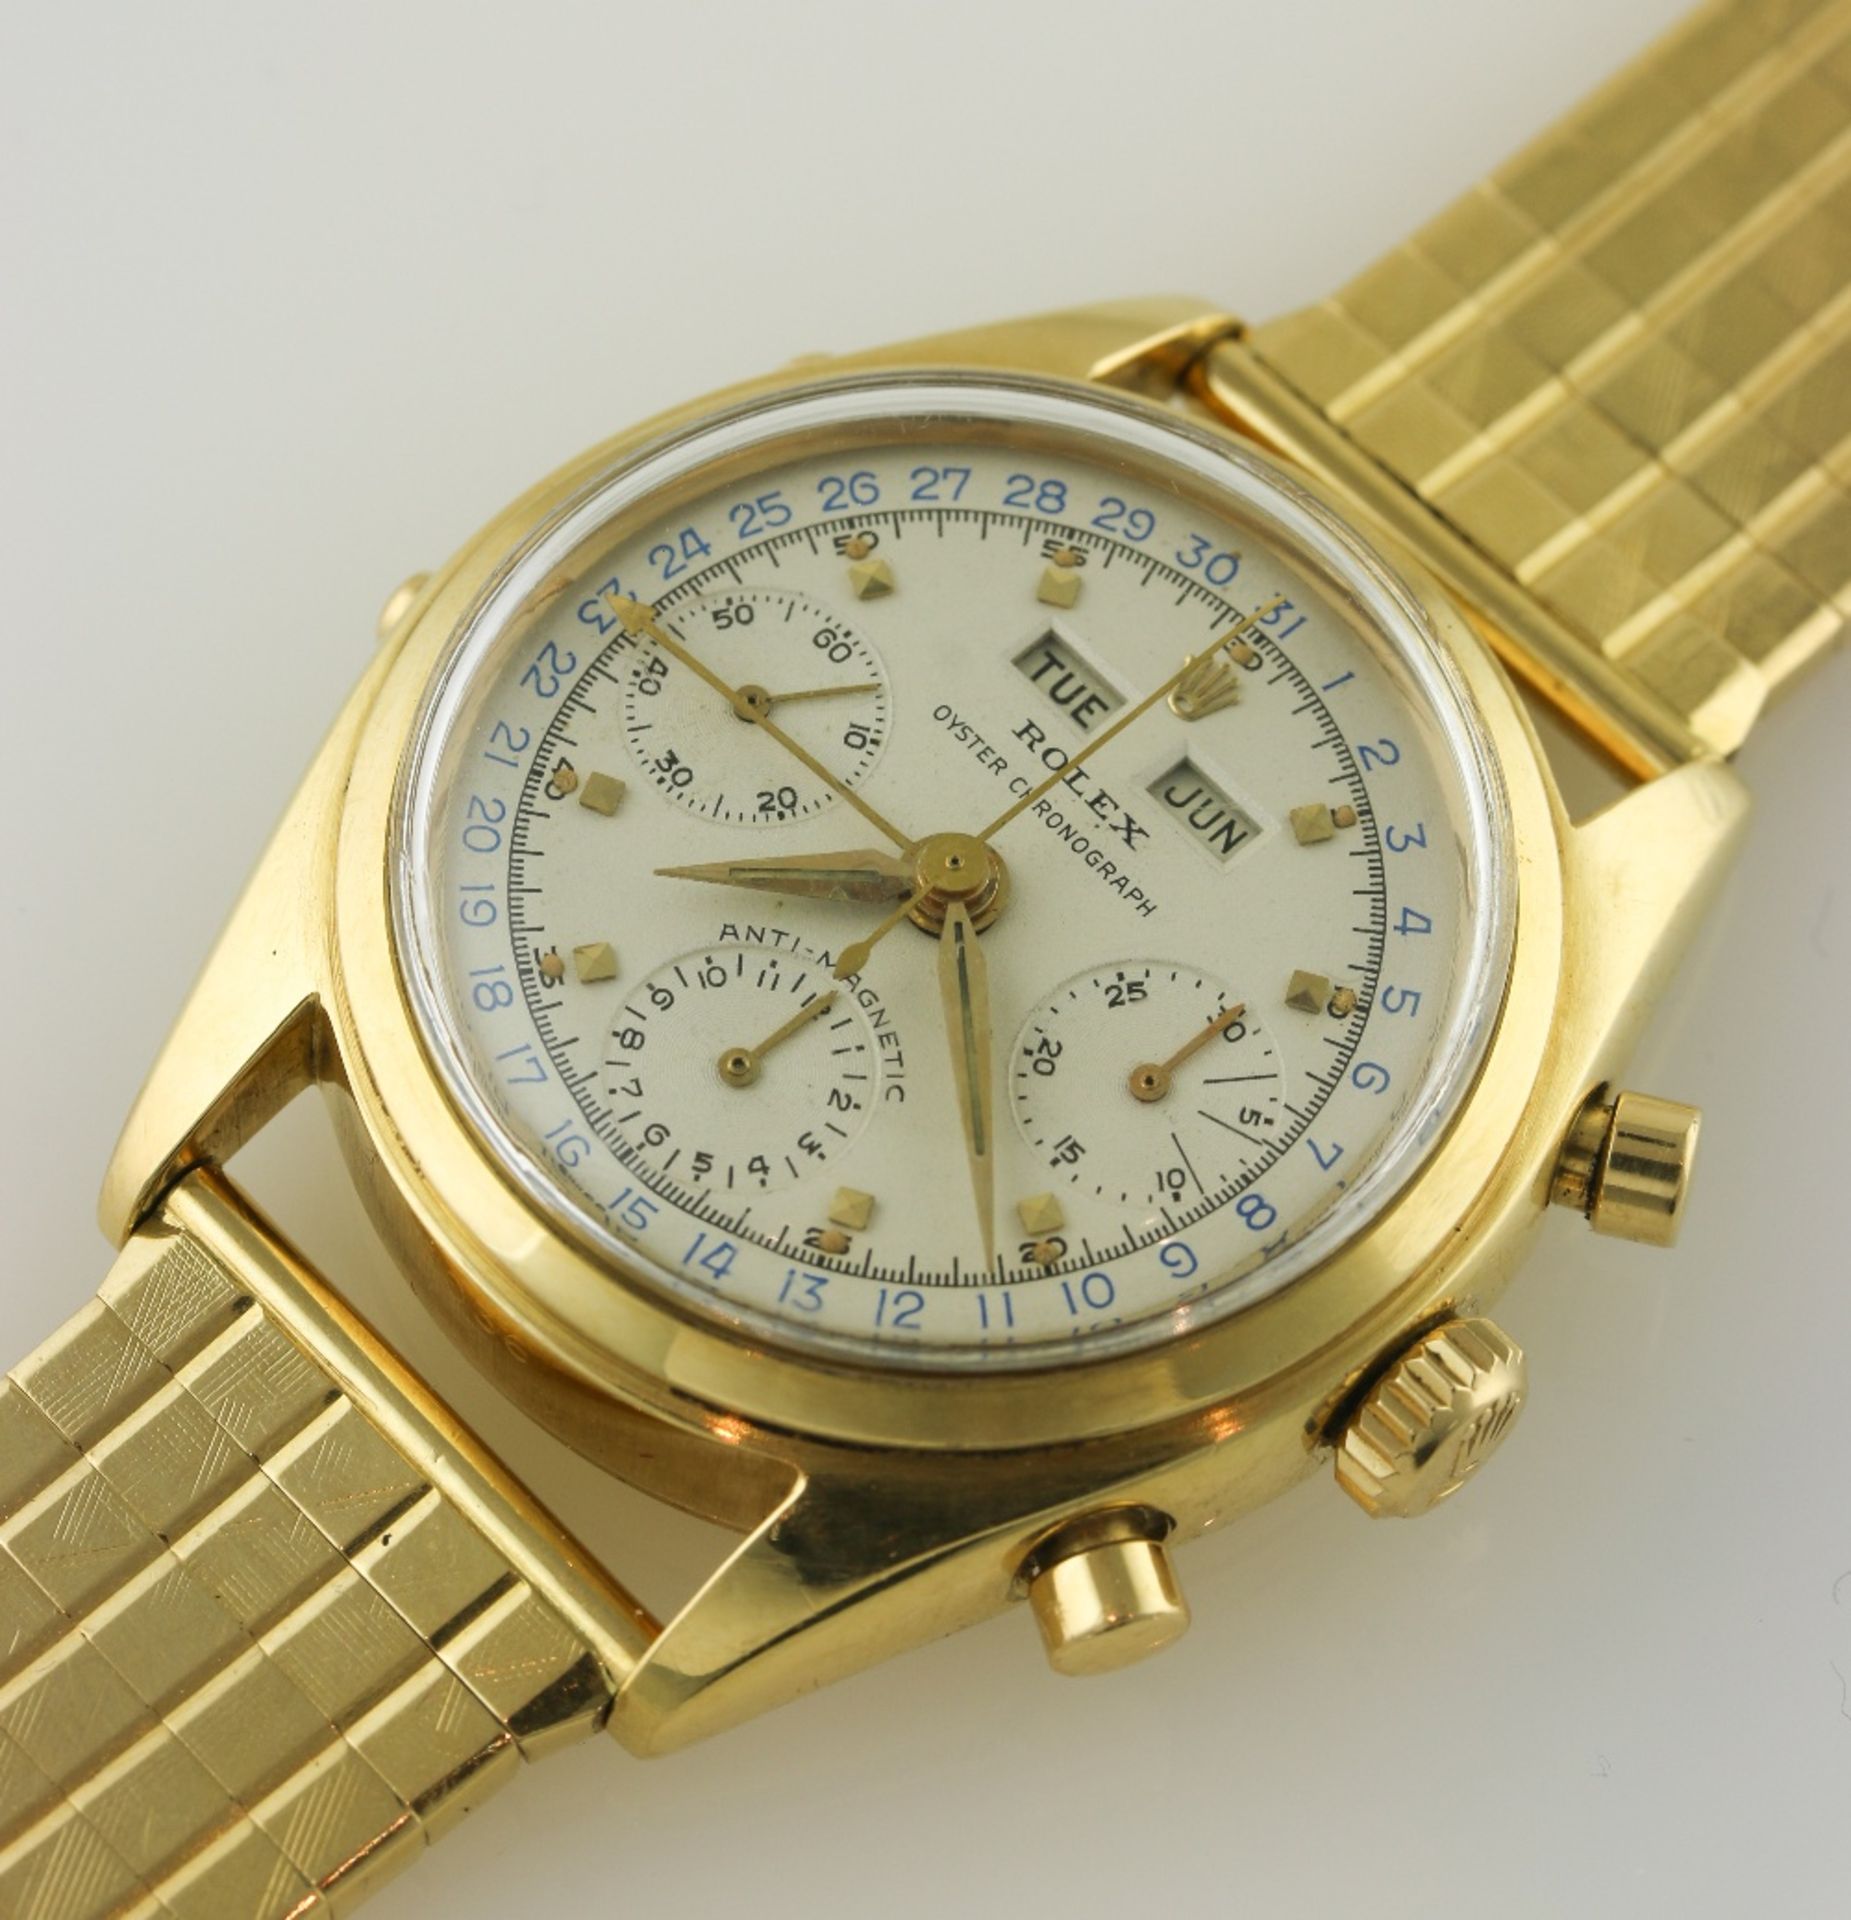 A FINE & RARE GENTLEMAN'S 18K SOLID GOLD ROLEX "JEAN-CLAUDE KILLY" OYSTER TRIPLE CALENDAR ANTI- - Image 4 of 13